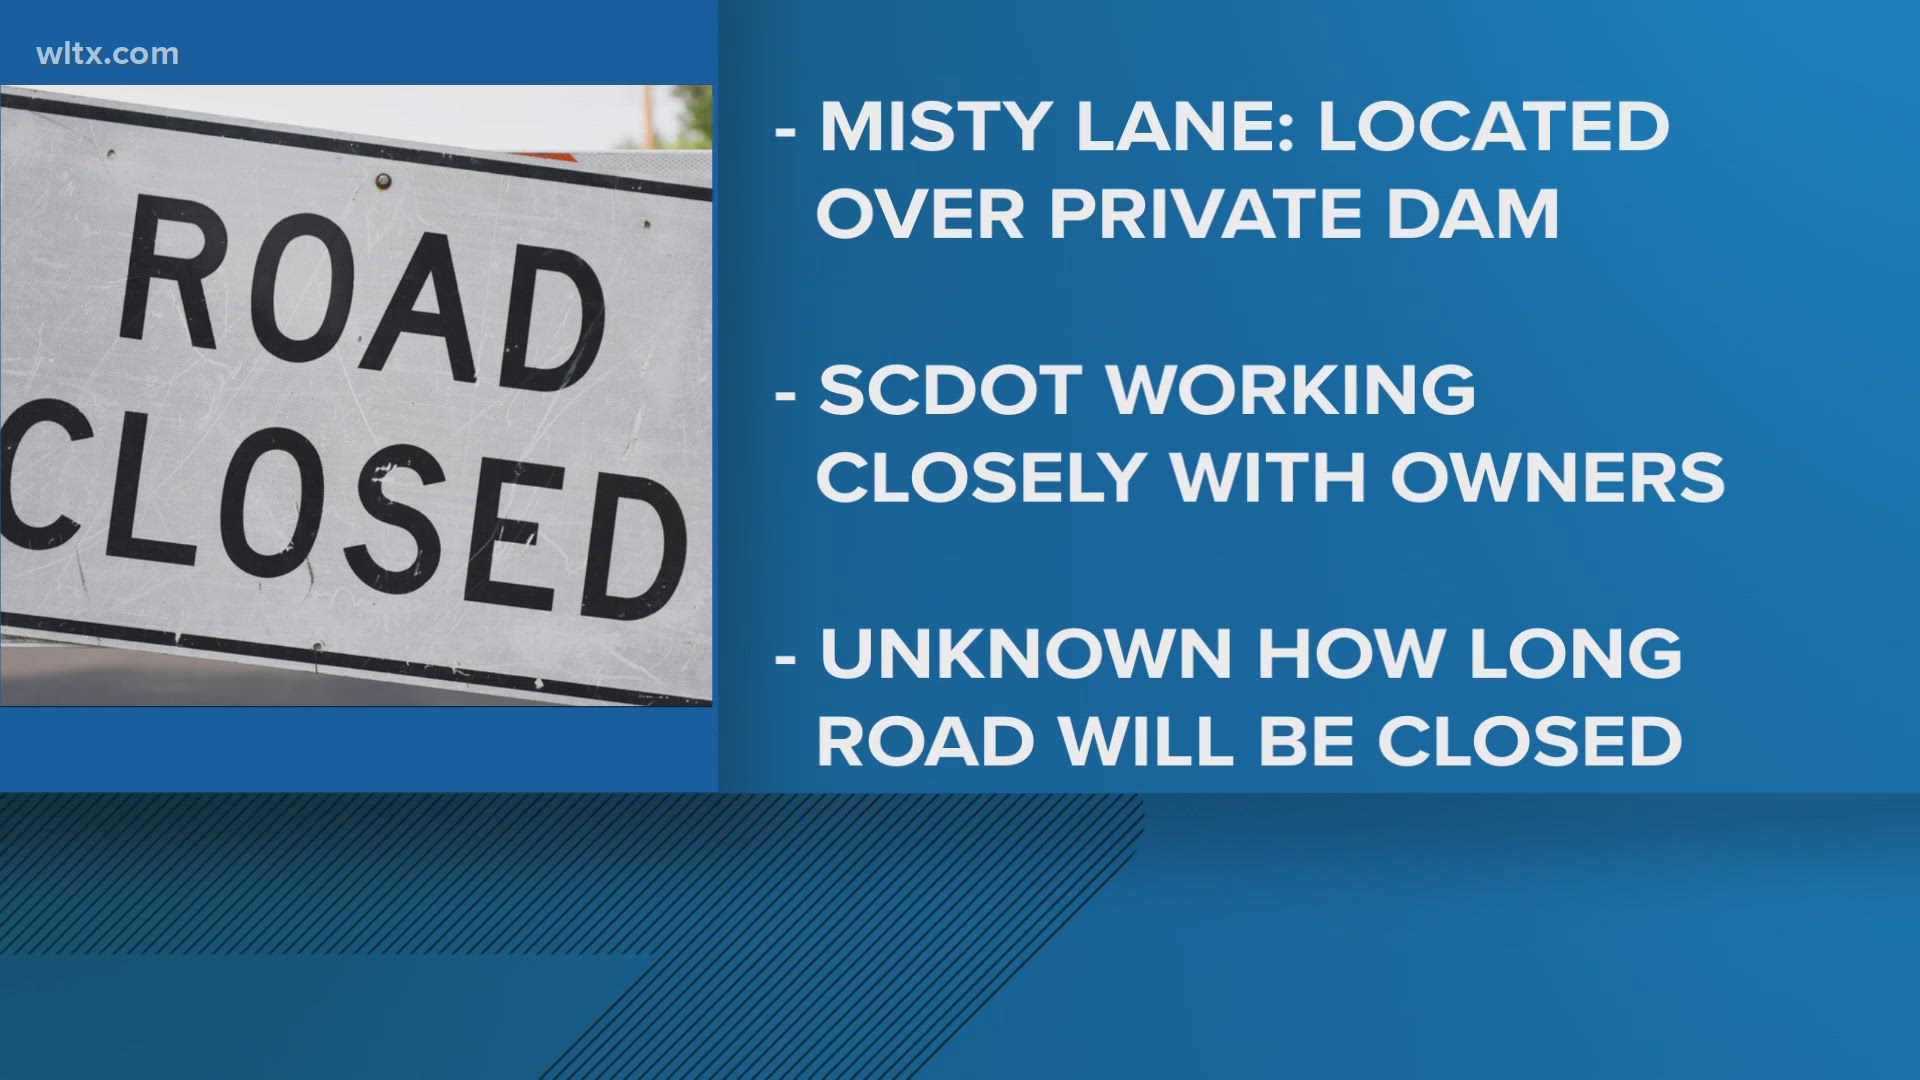 Misty Lane is a state road that is located over a private dam and SCDOT says they are working closely with the owner.